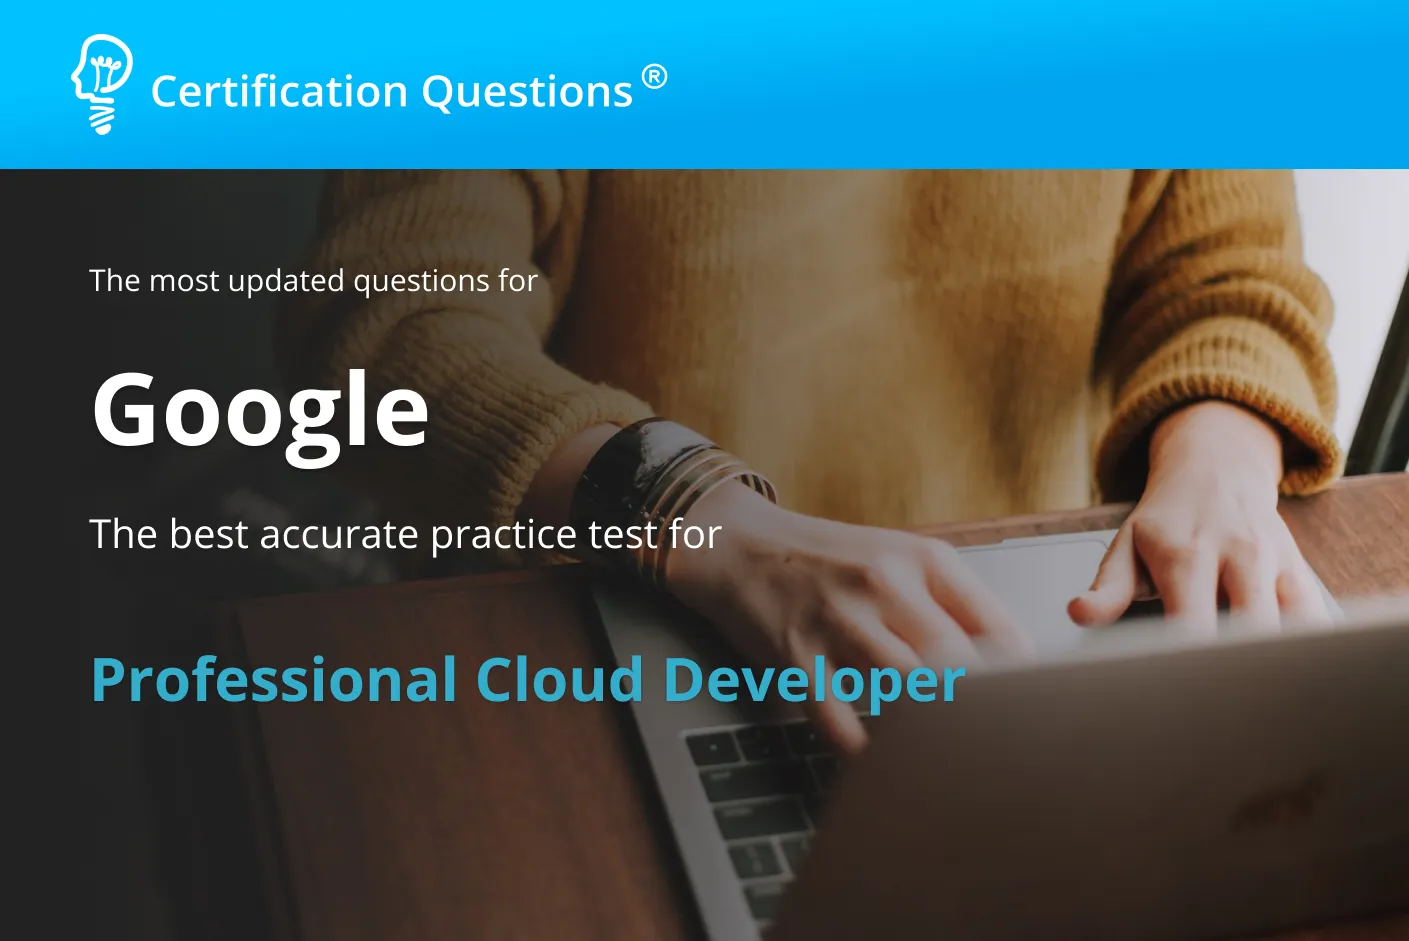 Here is the image for the google professional cloud developer certification.